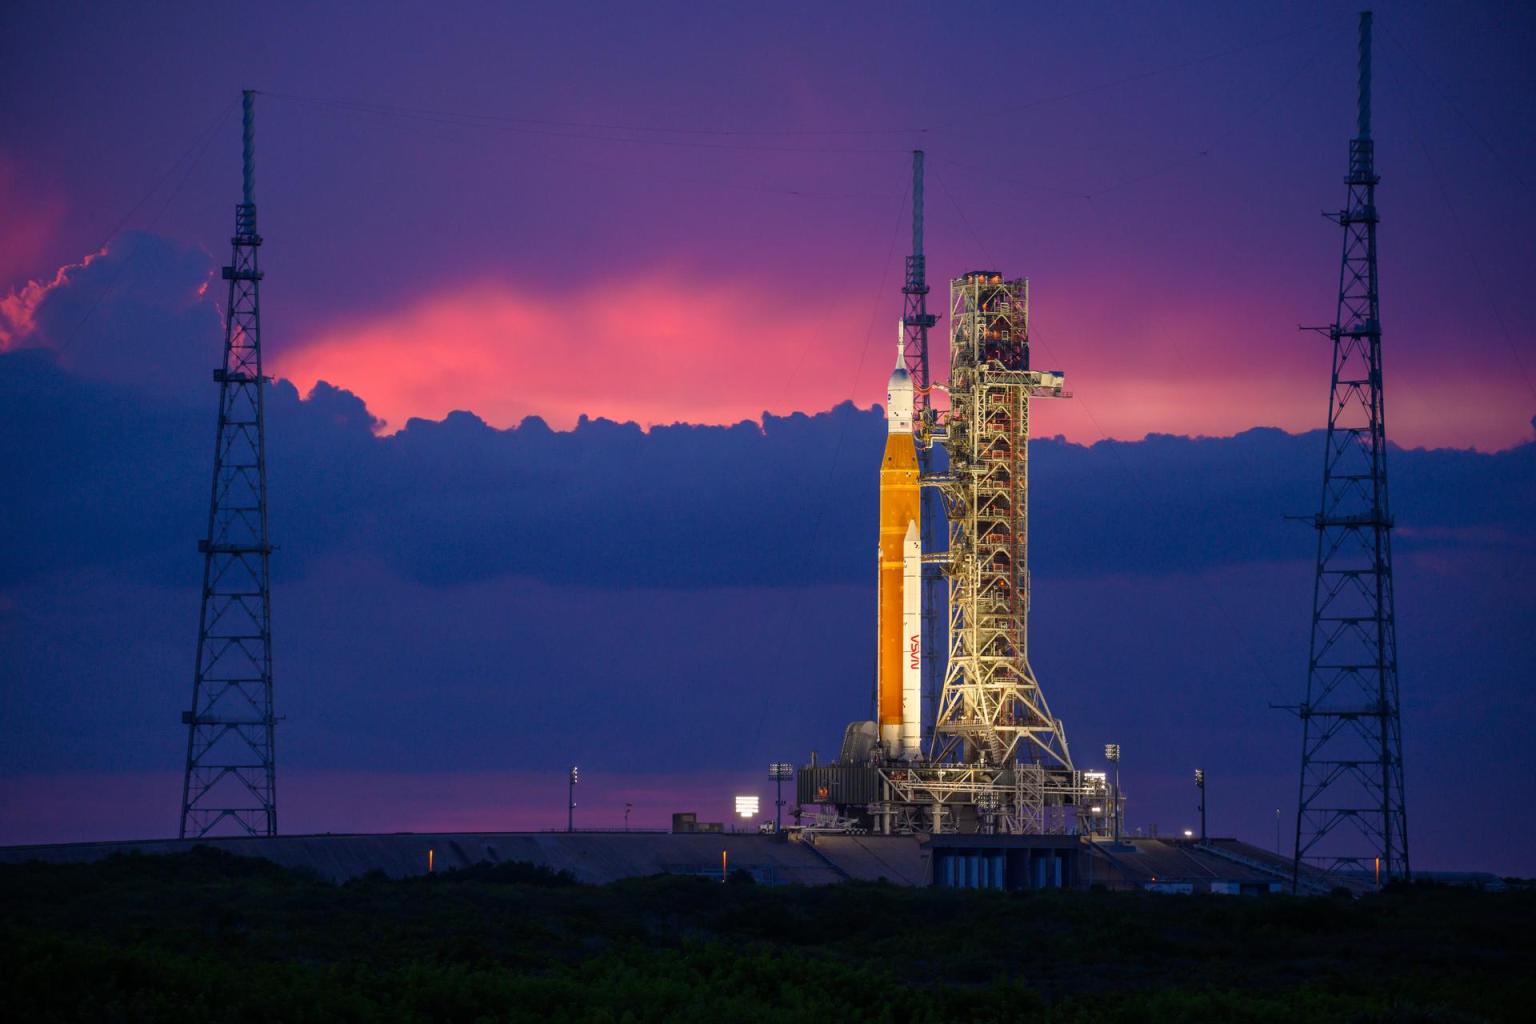 NASA’s Space Launch System (SLS) rocket with the Orion spacecraft aboard is seen atop the mobile launcher at Launch 39B at NASA’s Kennedy Space Center in Florida.